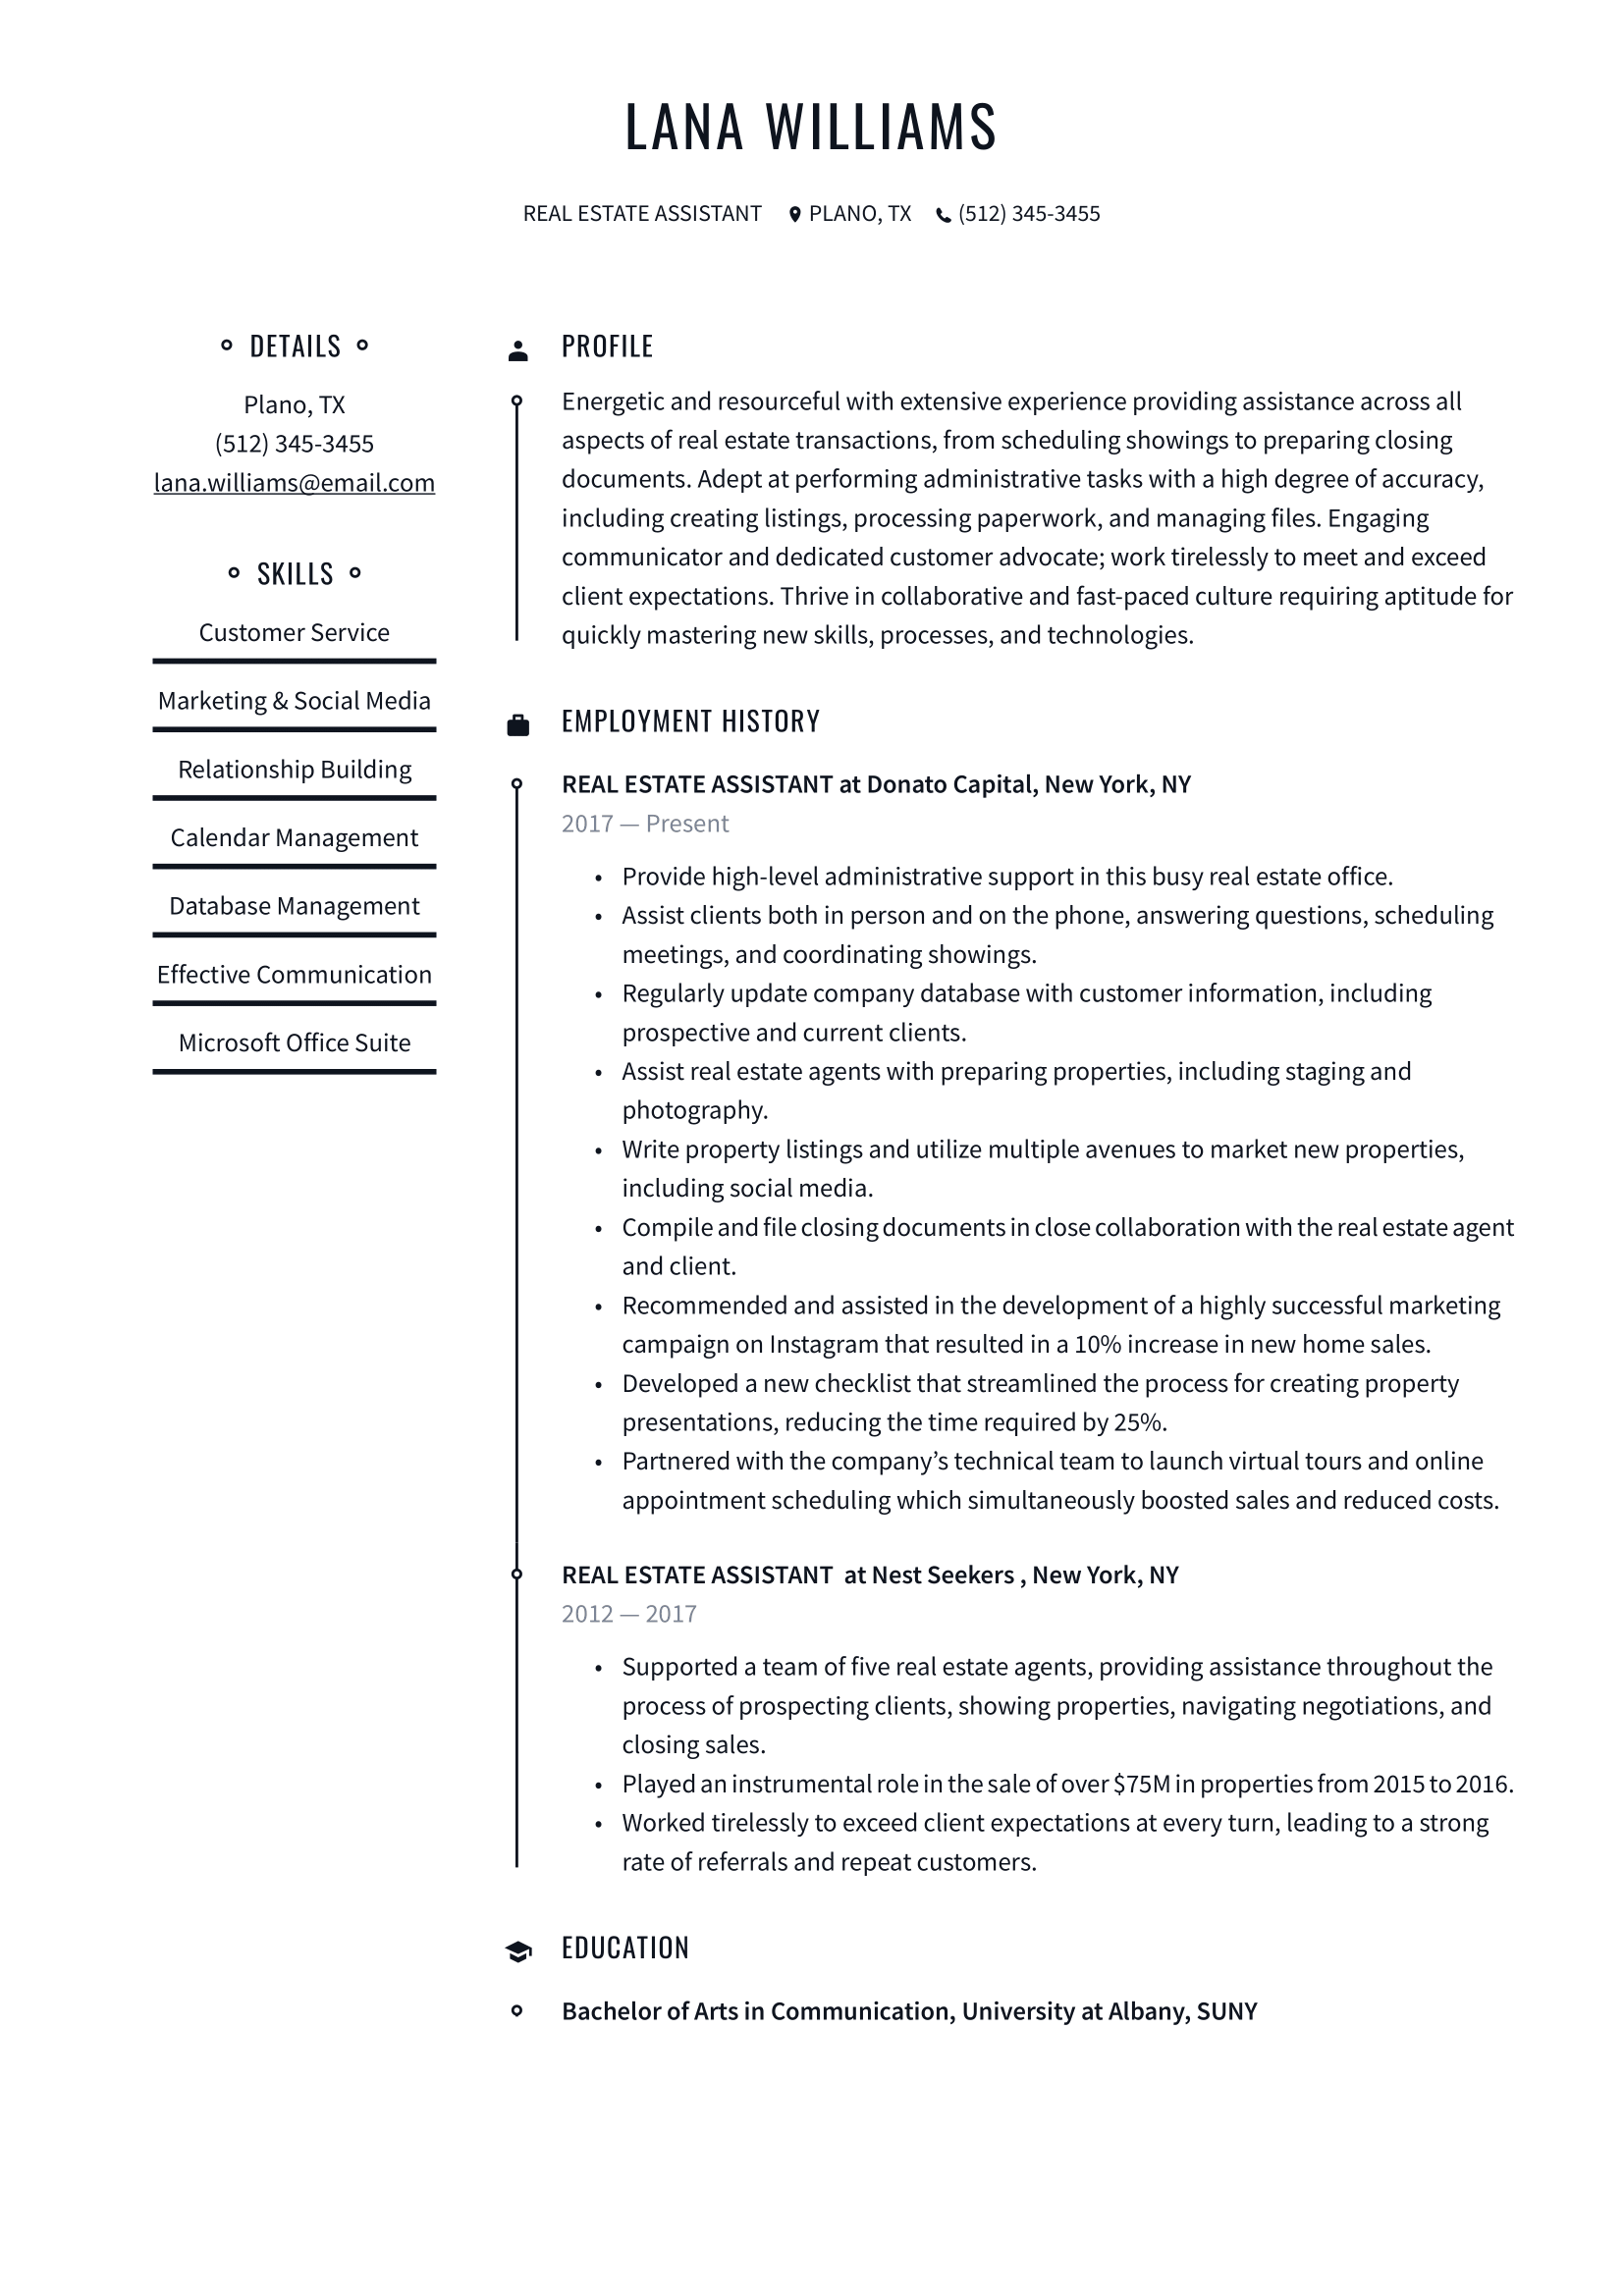 Real_Estate_Assistant-Resume-Example.png